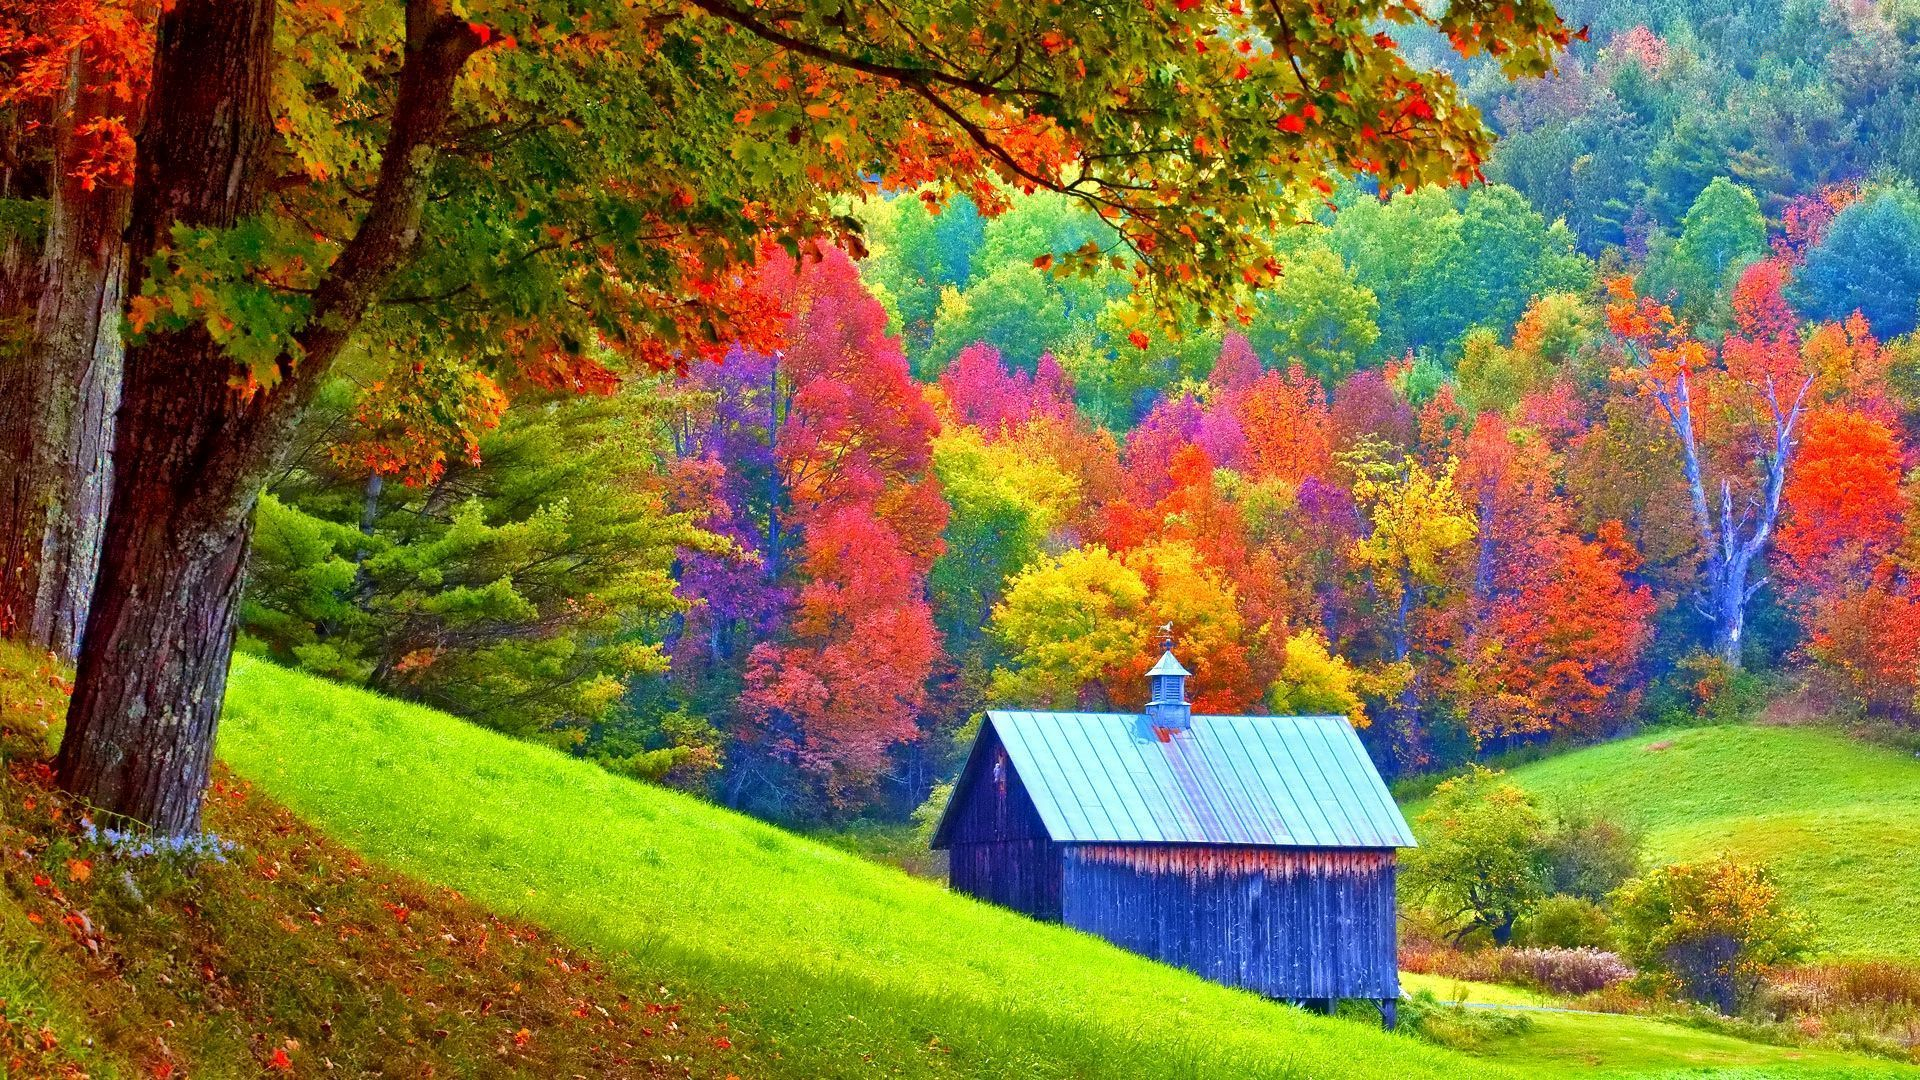 Fall Foliage Forest Man Made Shed Tree 1920x1080